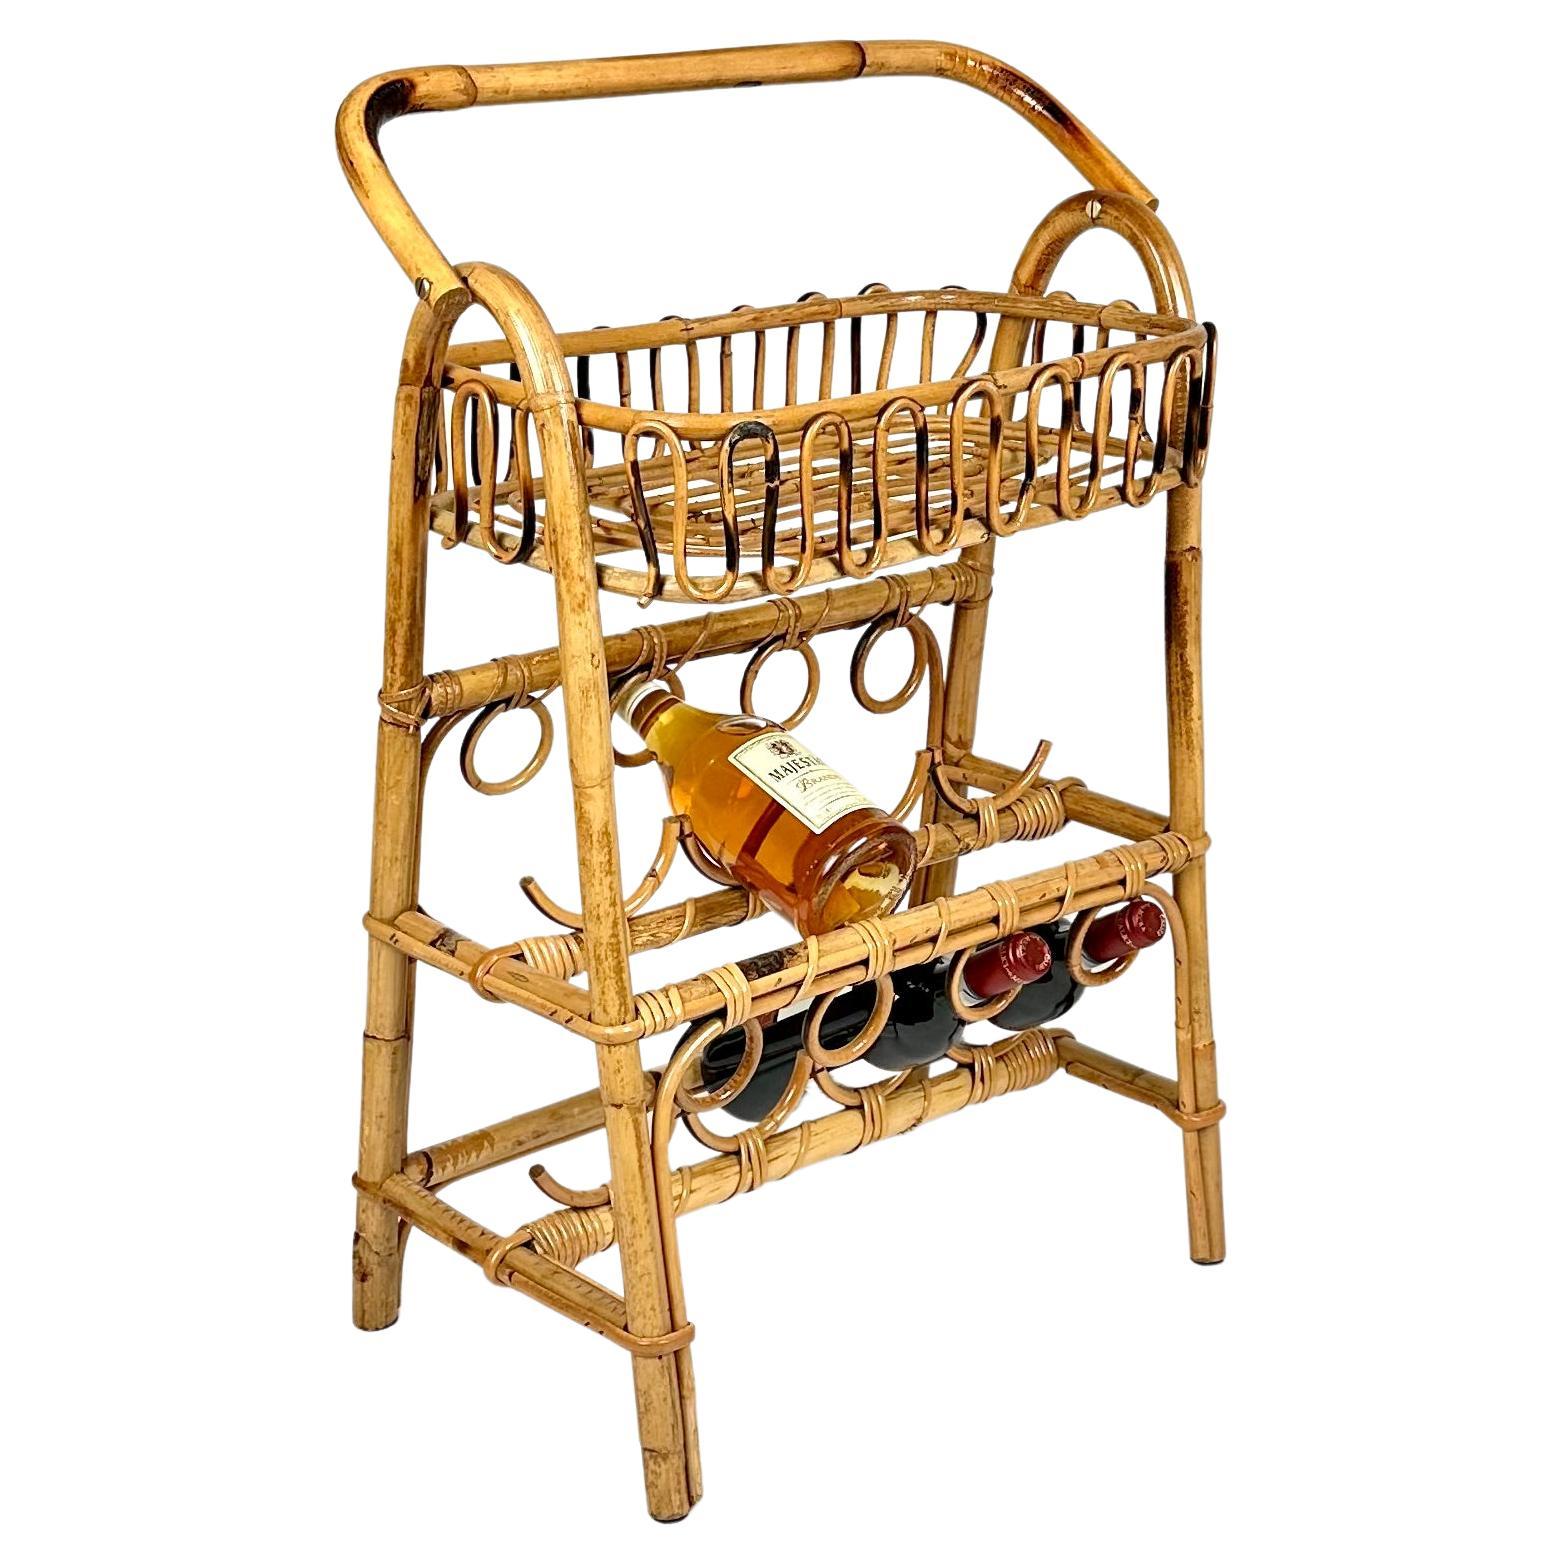 Midcentury Bamboo and Rattan Service Bar Table with Bottle Holder, Italy, 1960s For Sale 6